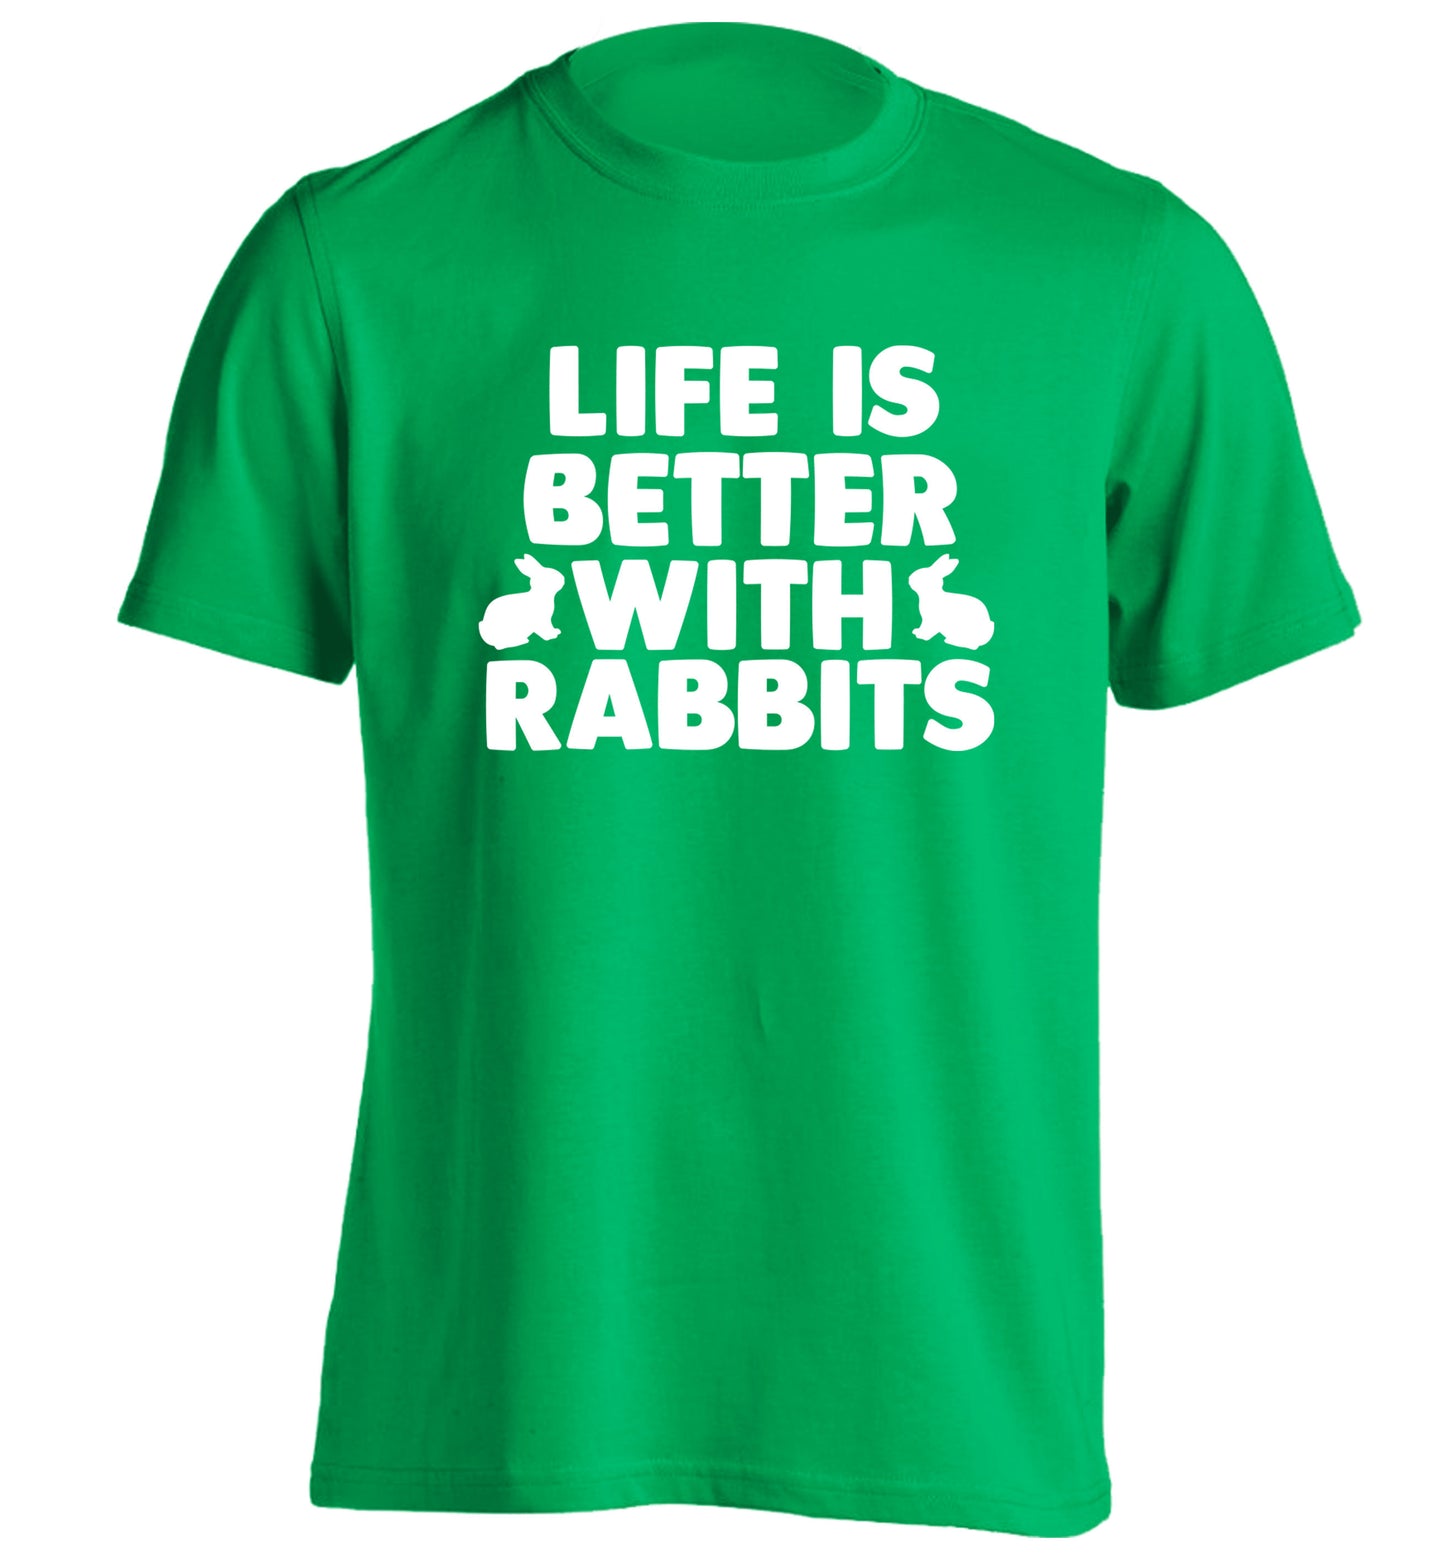 Life is better with rabbits adults unisex green Tshirt 2XL